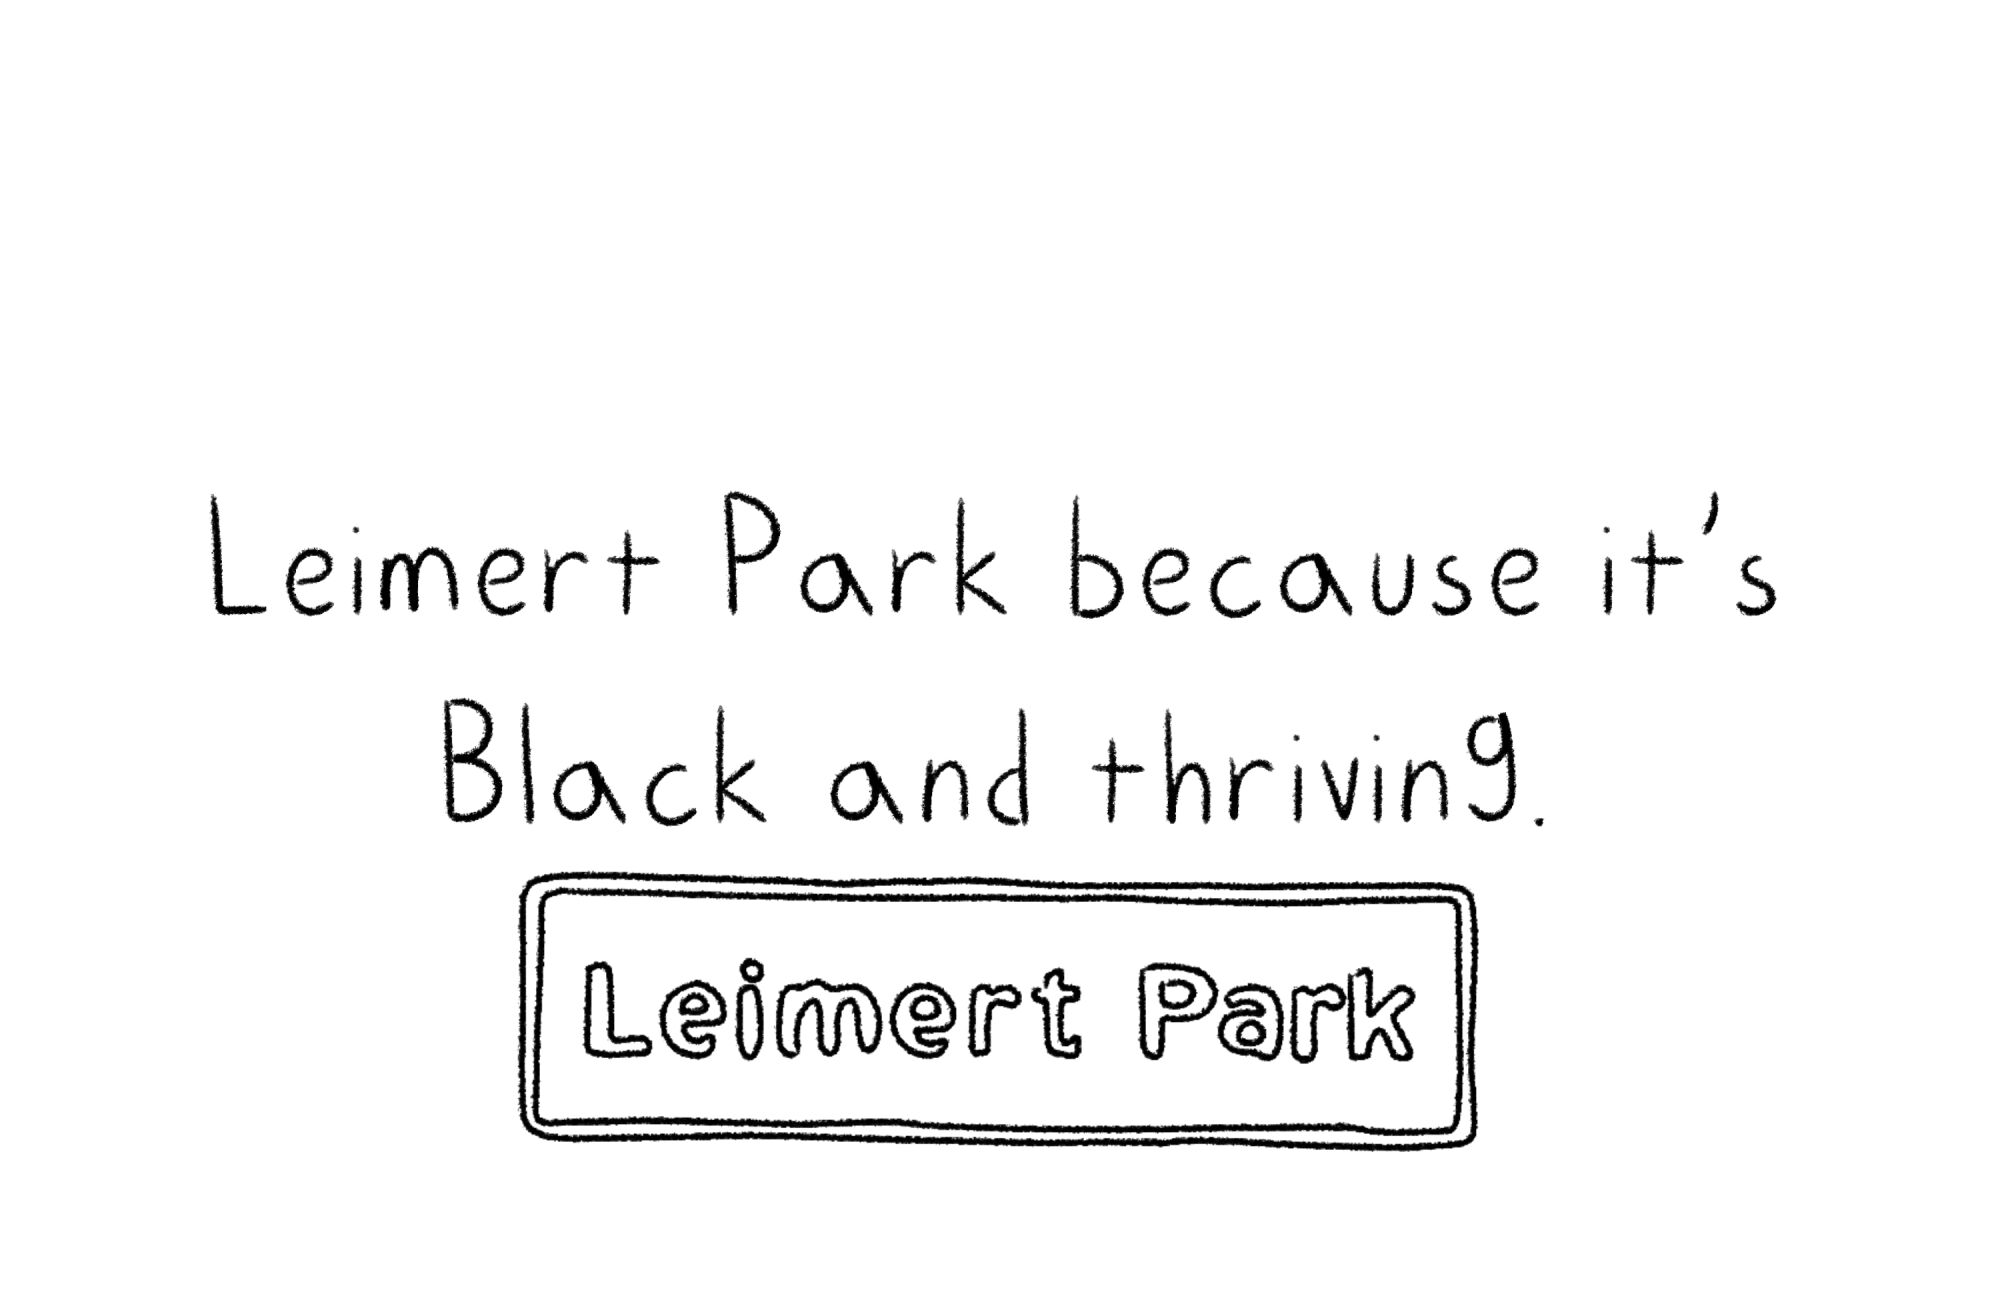 The words "Leimert Park because it's Black and thriving."